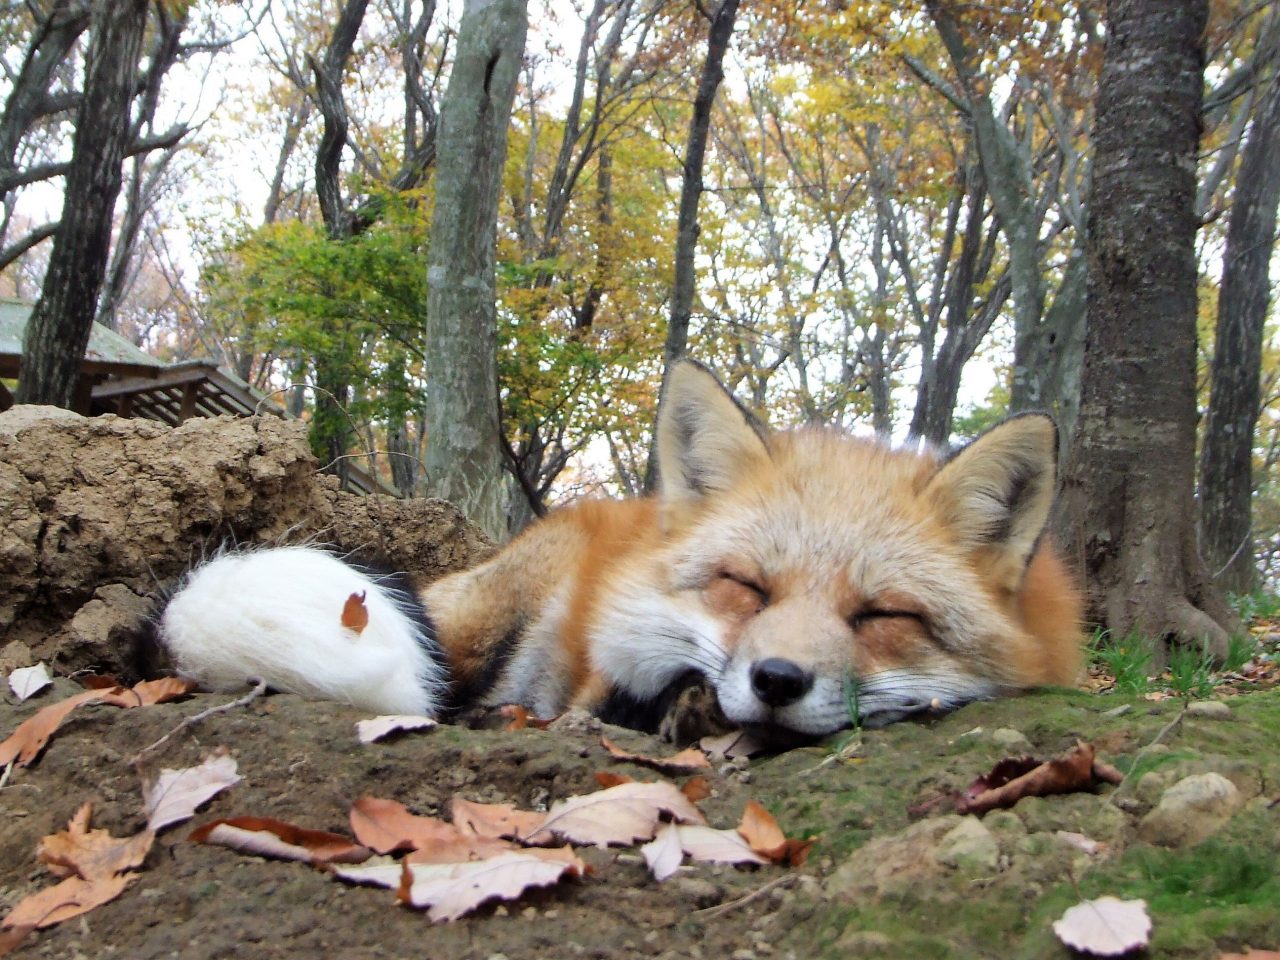 Cuddle their fluffy foxes! A rare zoo with more than 100 foxes where you can see and cuddle them. "Miyagi Zao Fox Village"